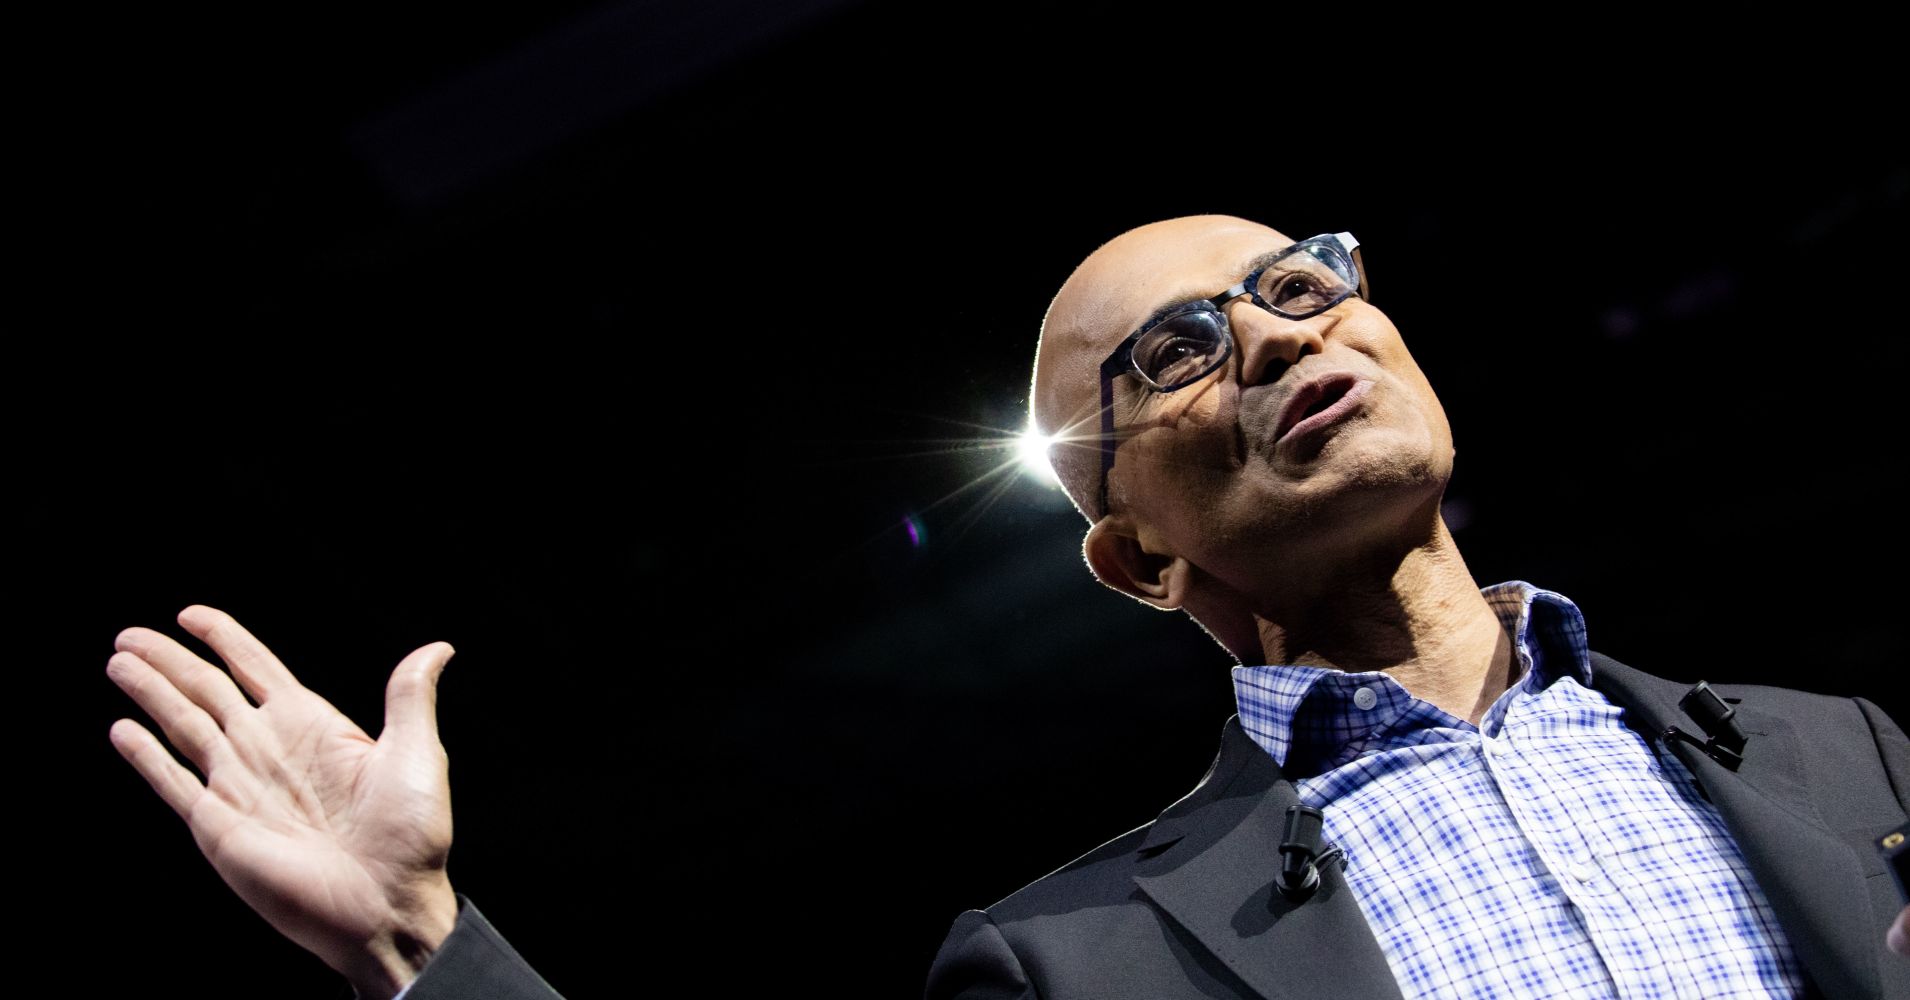 Satya Nadella, chief executive officer of Microsoft Corp., attends the Viva Tech start-up and technology gathering at Parc des Expositions Porte de Versailles in Paris on May 24, 2018.